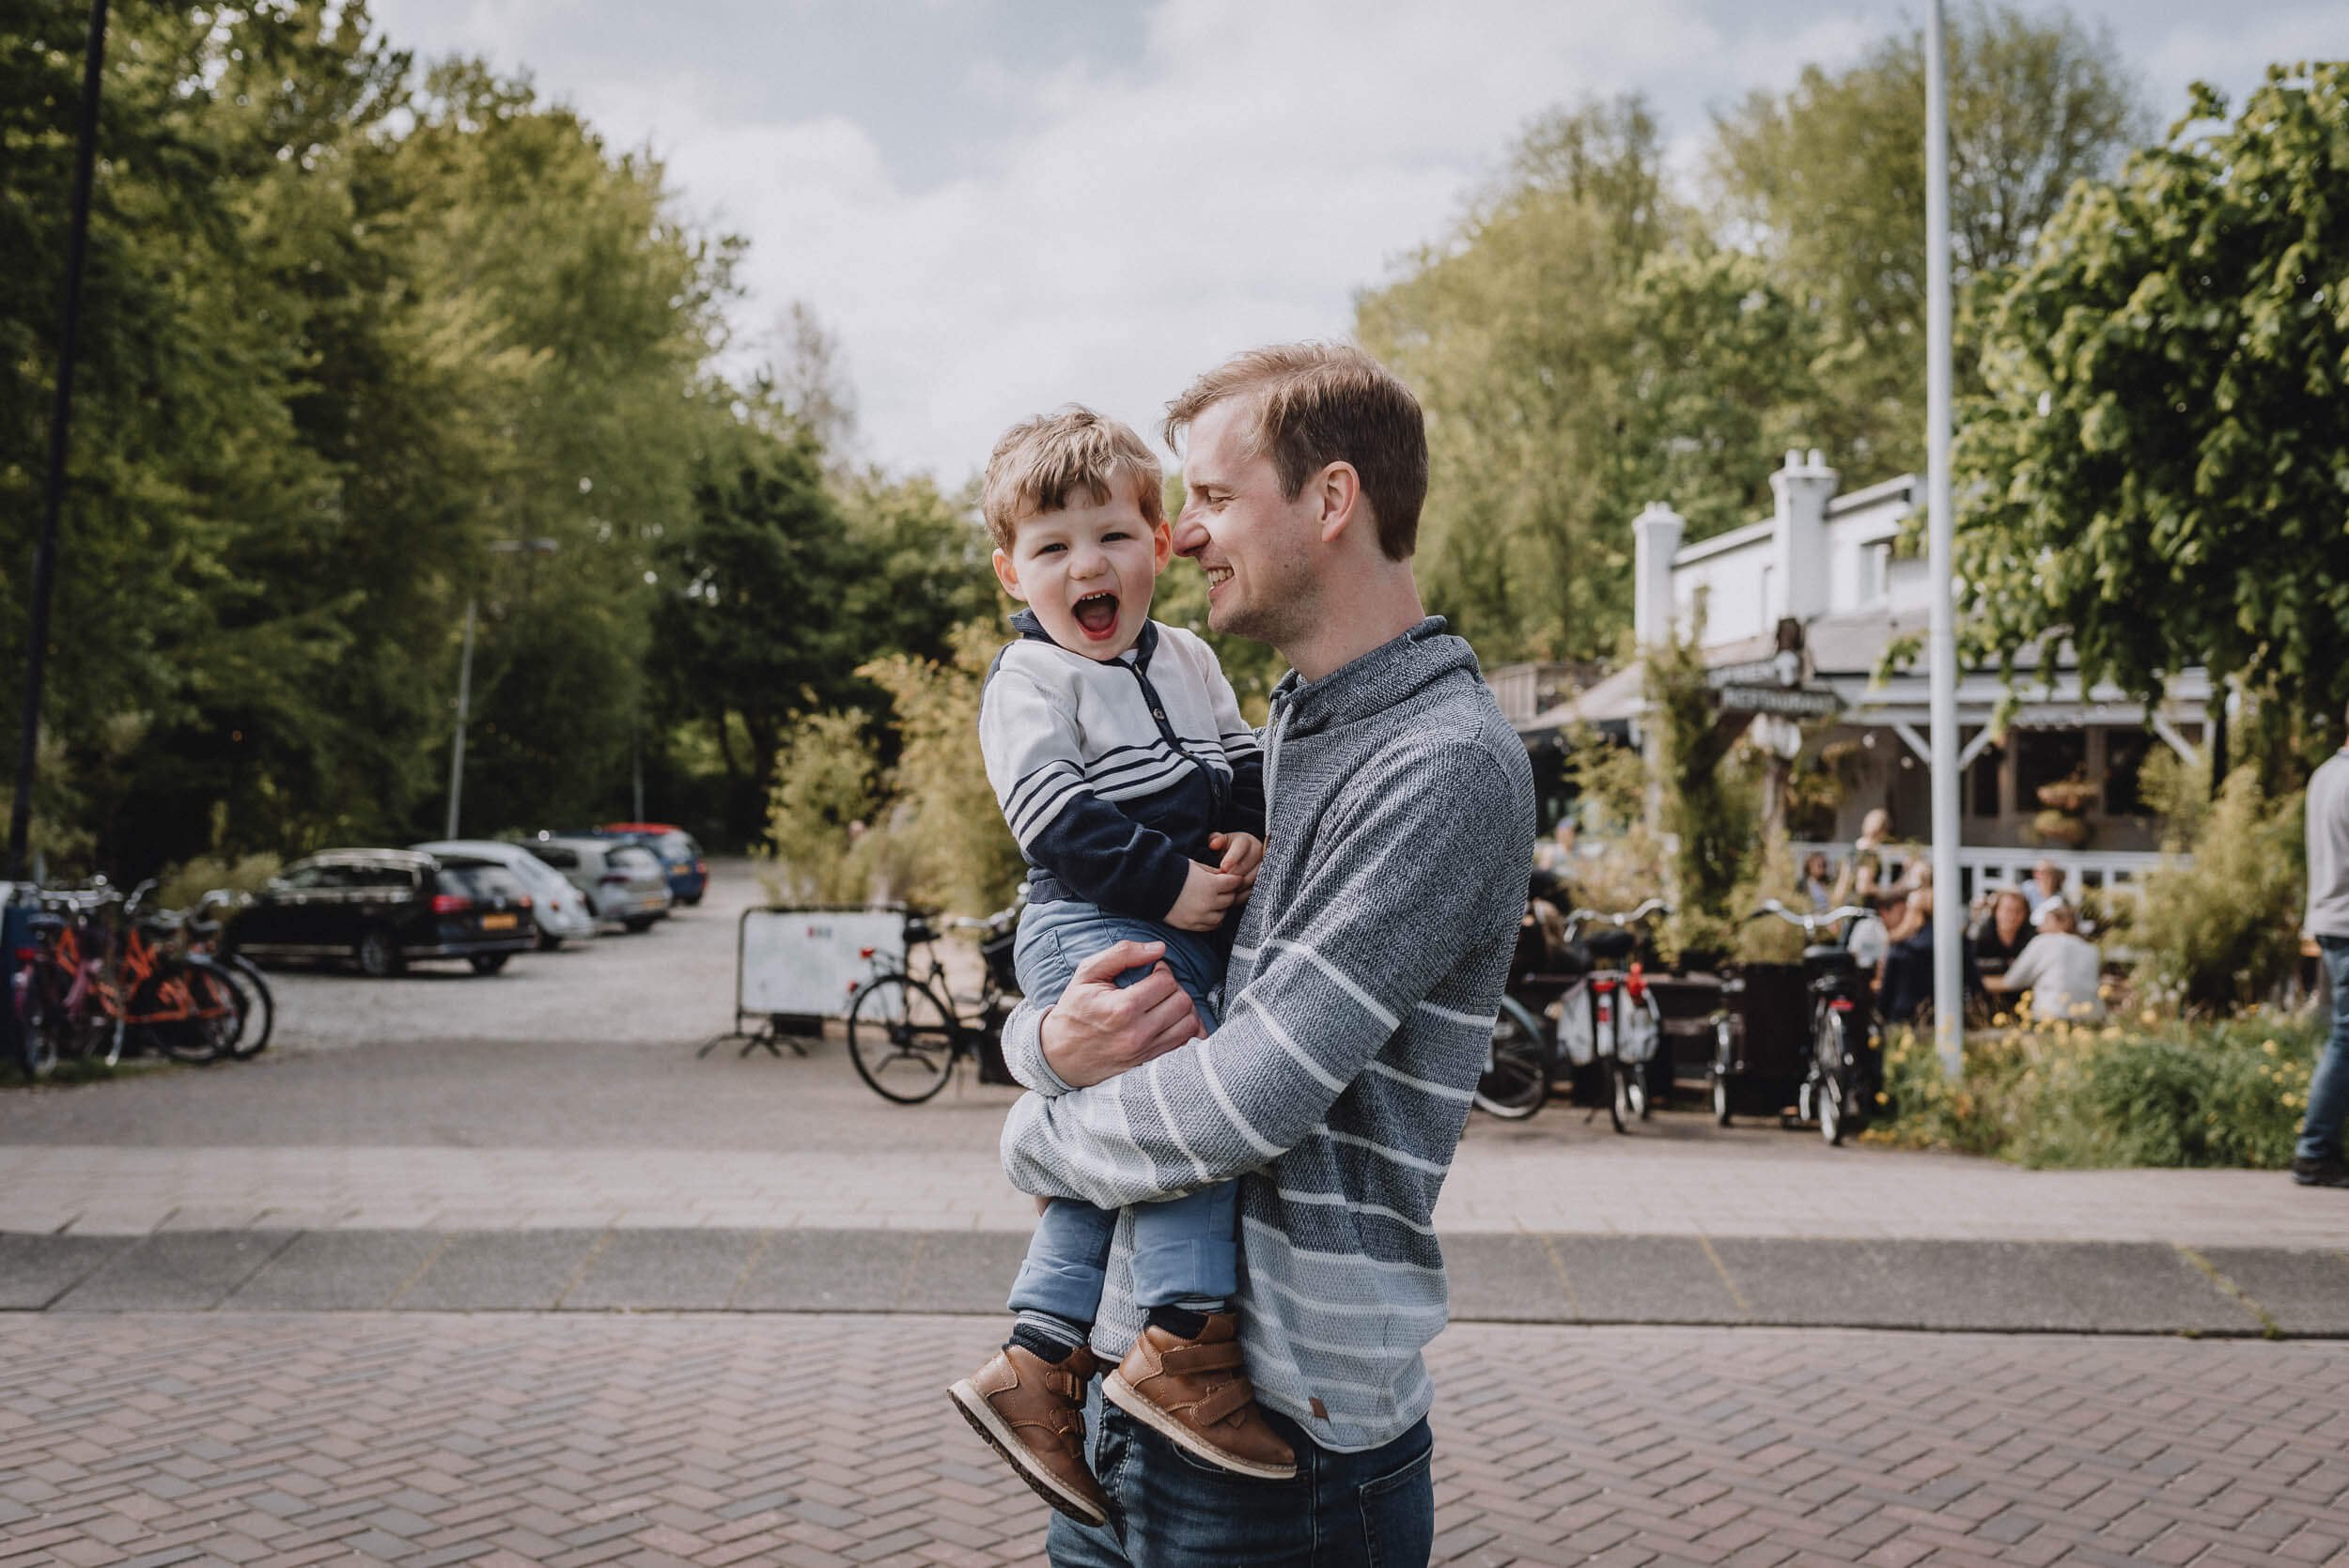 Vicky McLachlan Photography | Amsterdam Maternity Photographer | Singels family_21